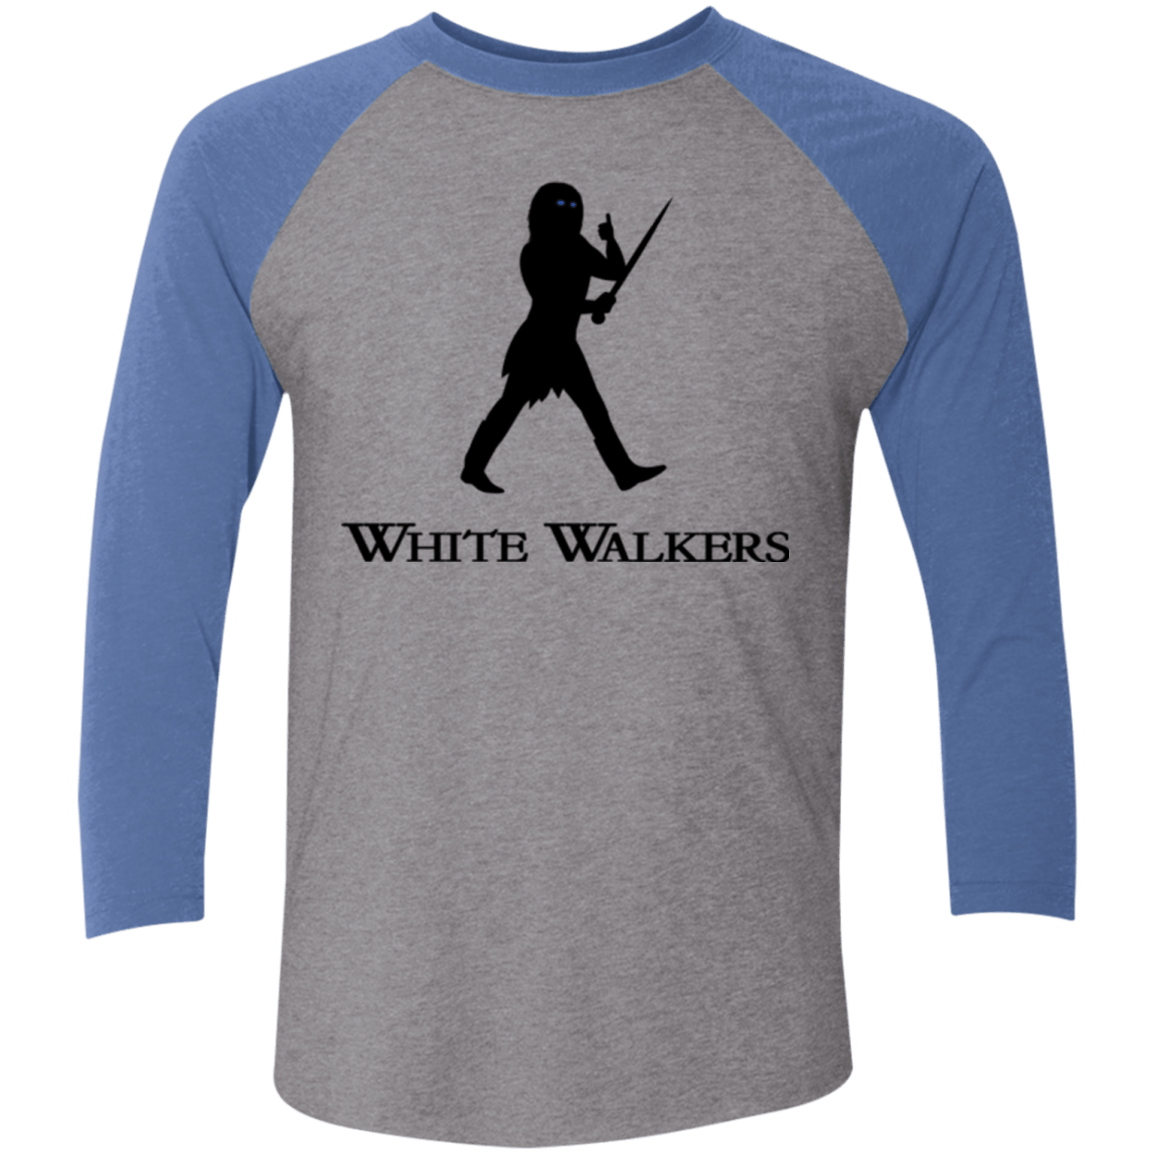 T-Shirts Premium Heather/ Vintage Royal / X-Small White walkers Men's Triblend 3/4 Sleeve